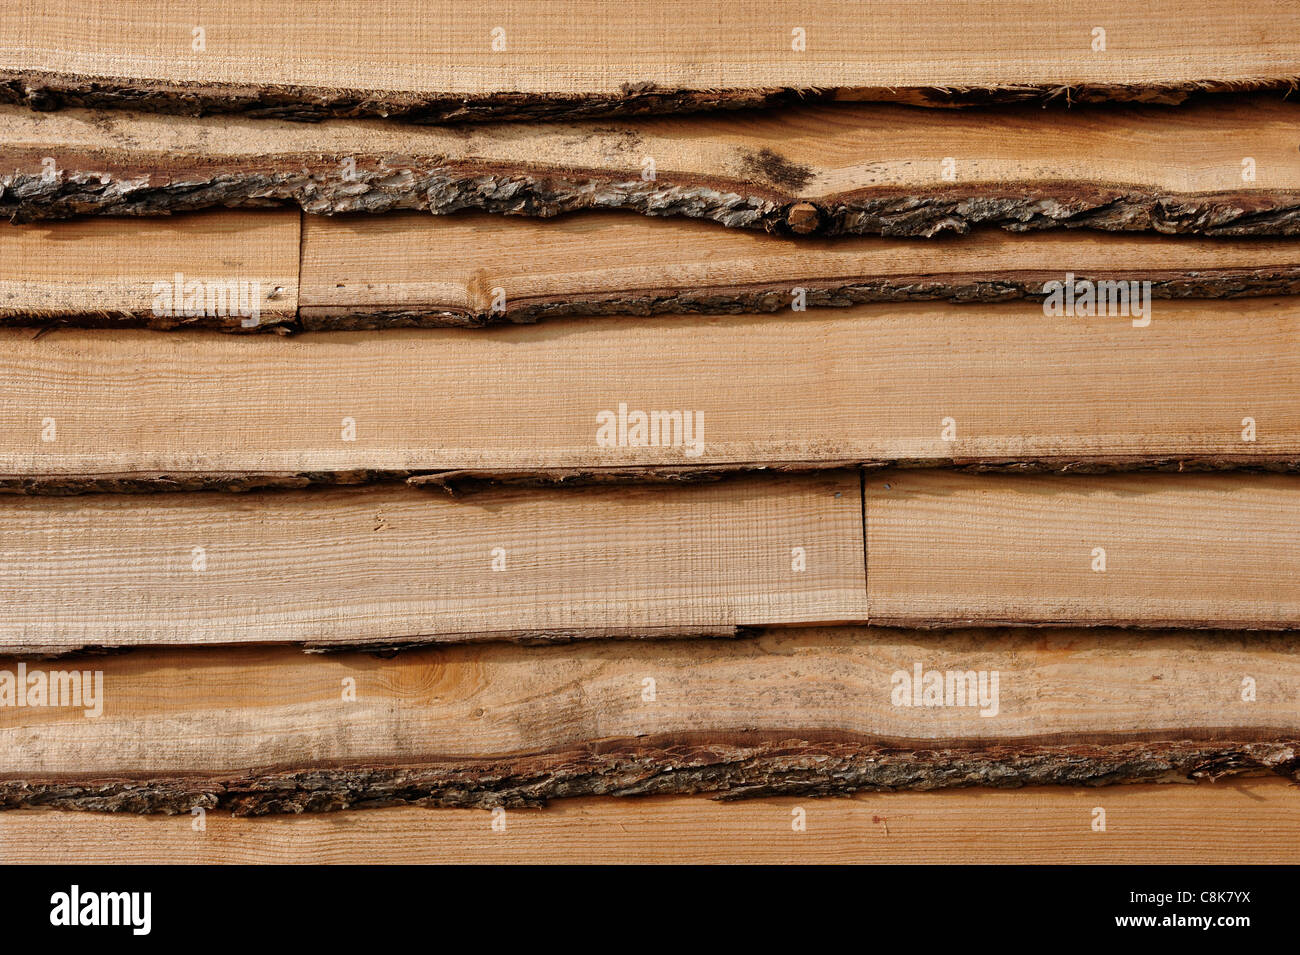 Natural wooden weatherboarding cladding Stock Photo